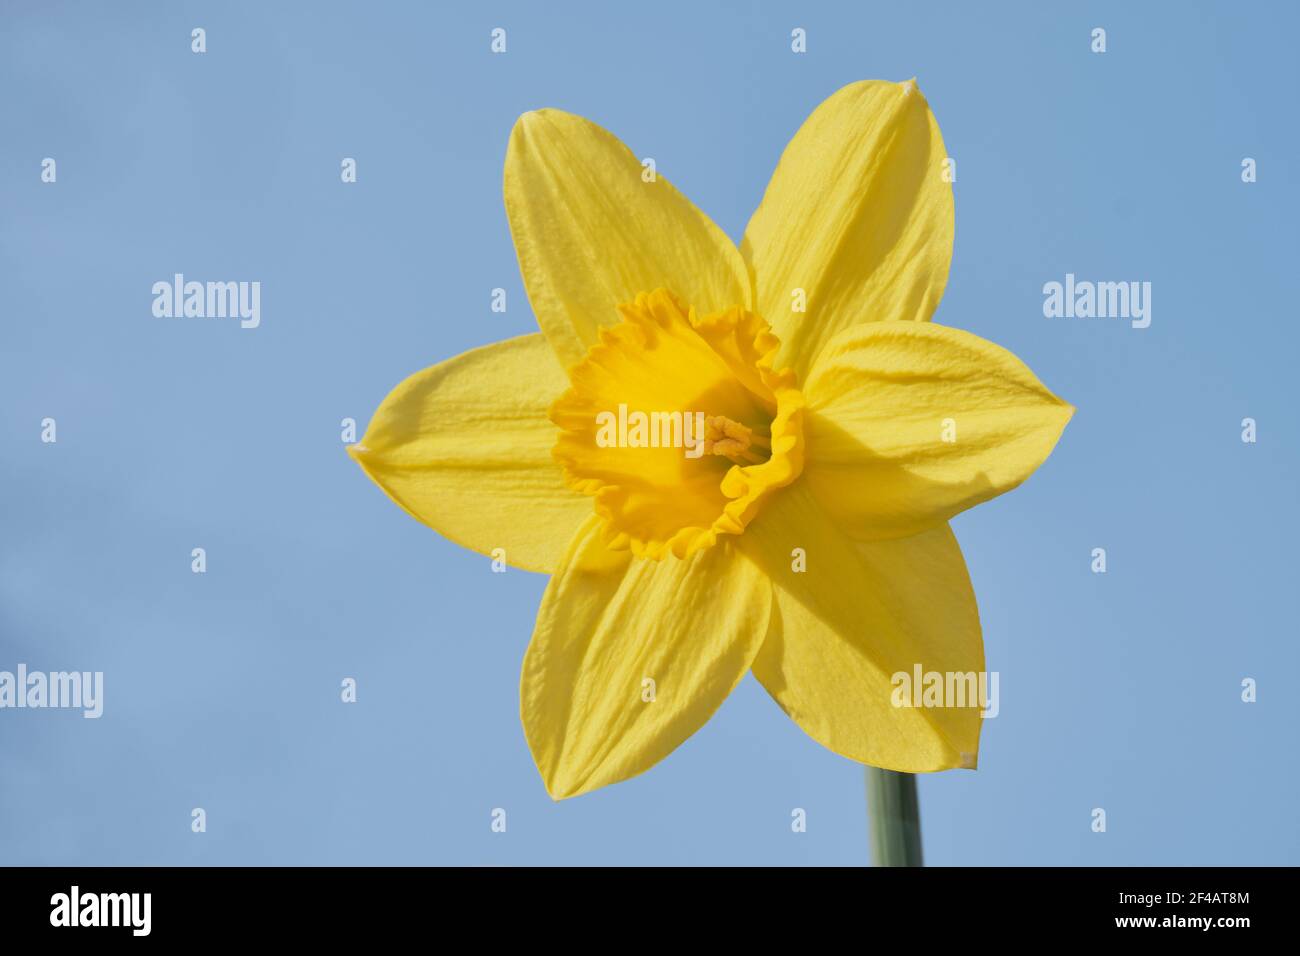 Portrait of single yellow daffodil flower clearly showing petals, stamens and pollen.  Flower stands in front of complementary cloudless, blue sky. Stock Photo